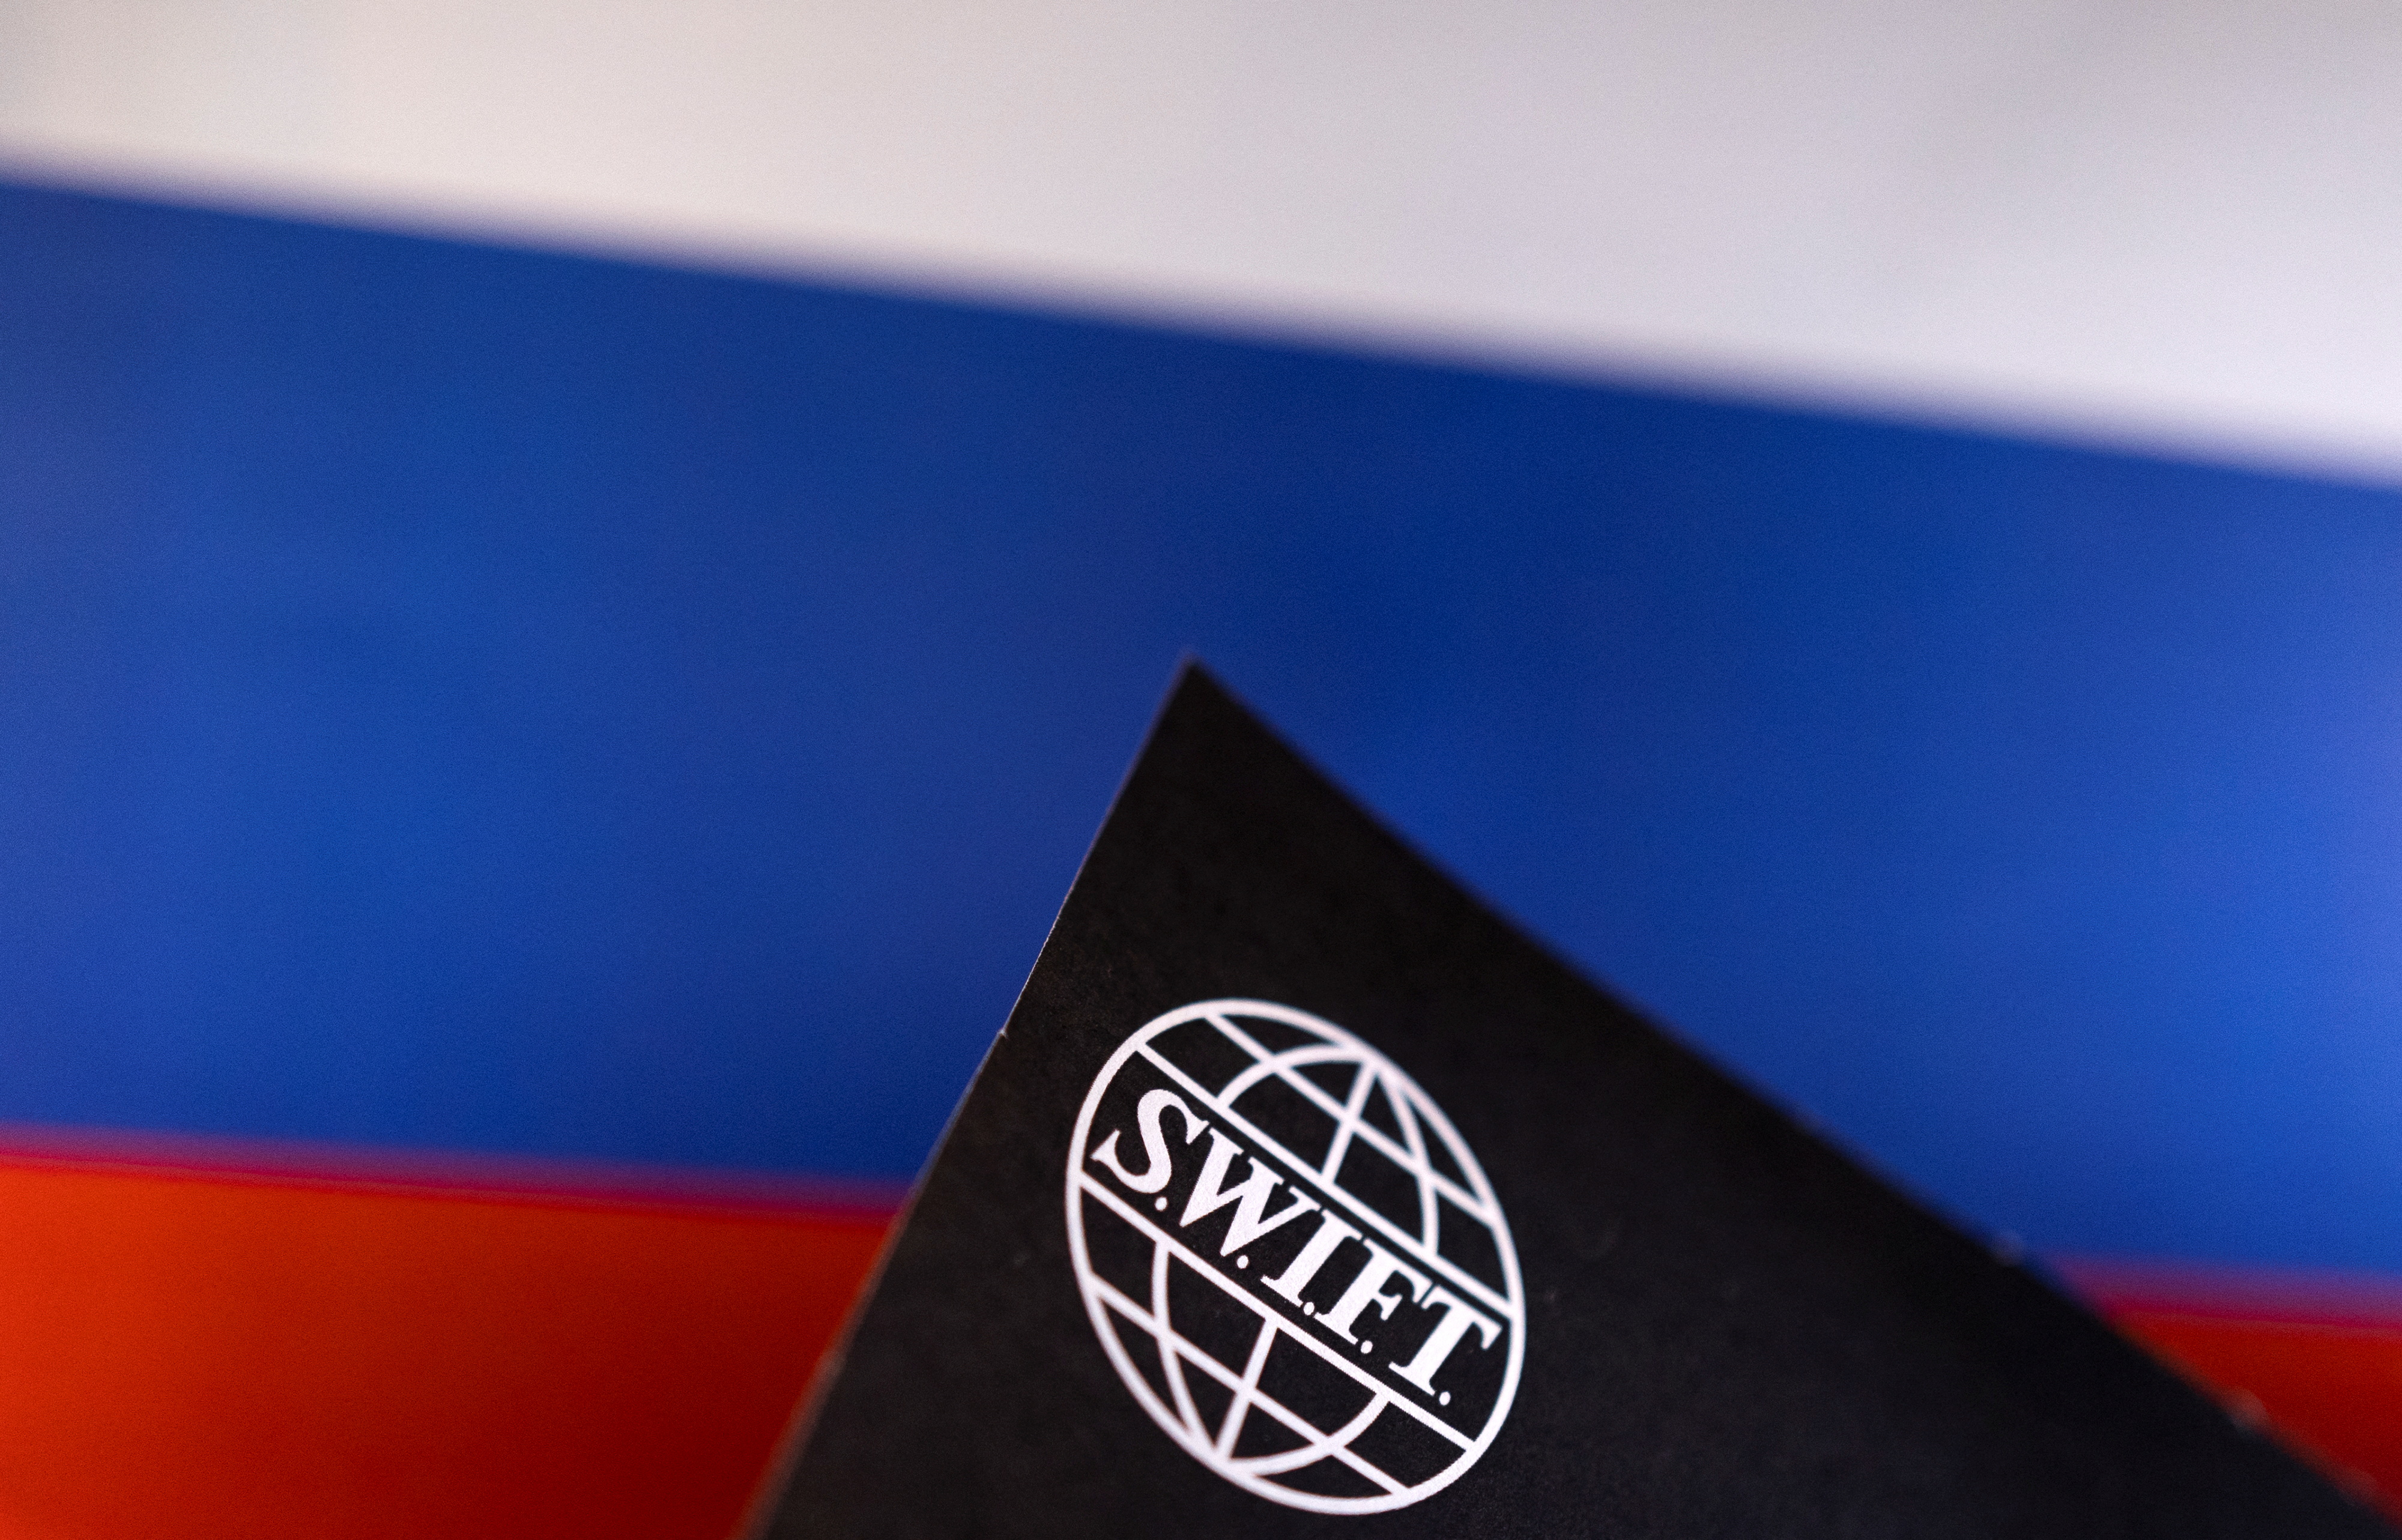 Illustration shows Swift logo and Russian flag